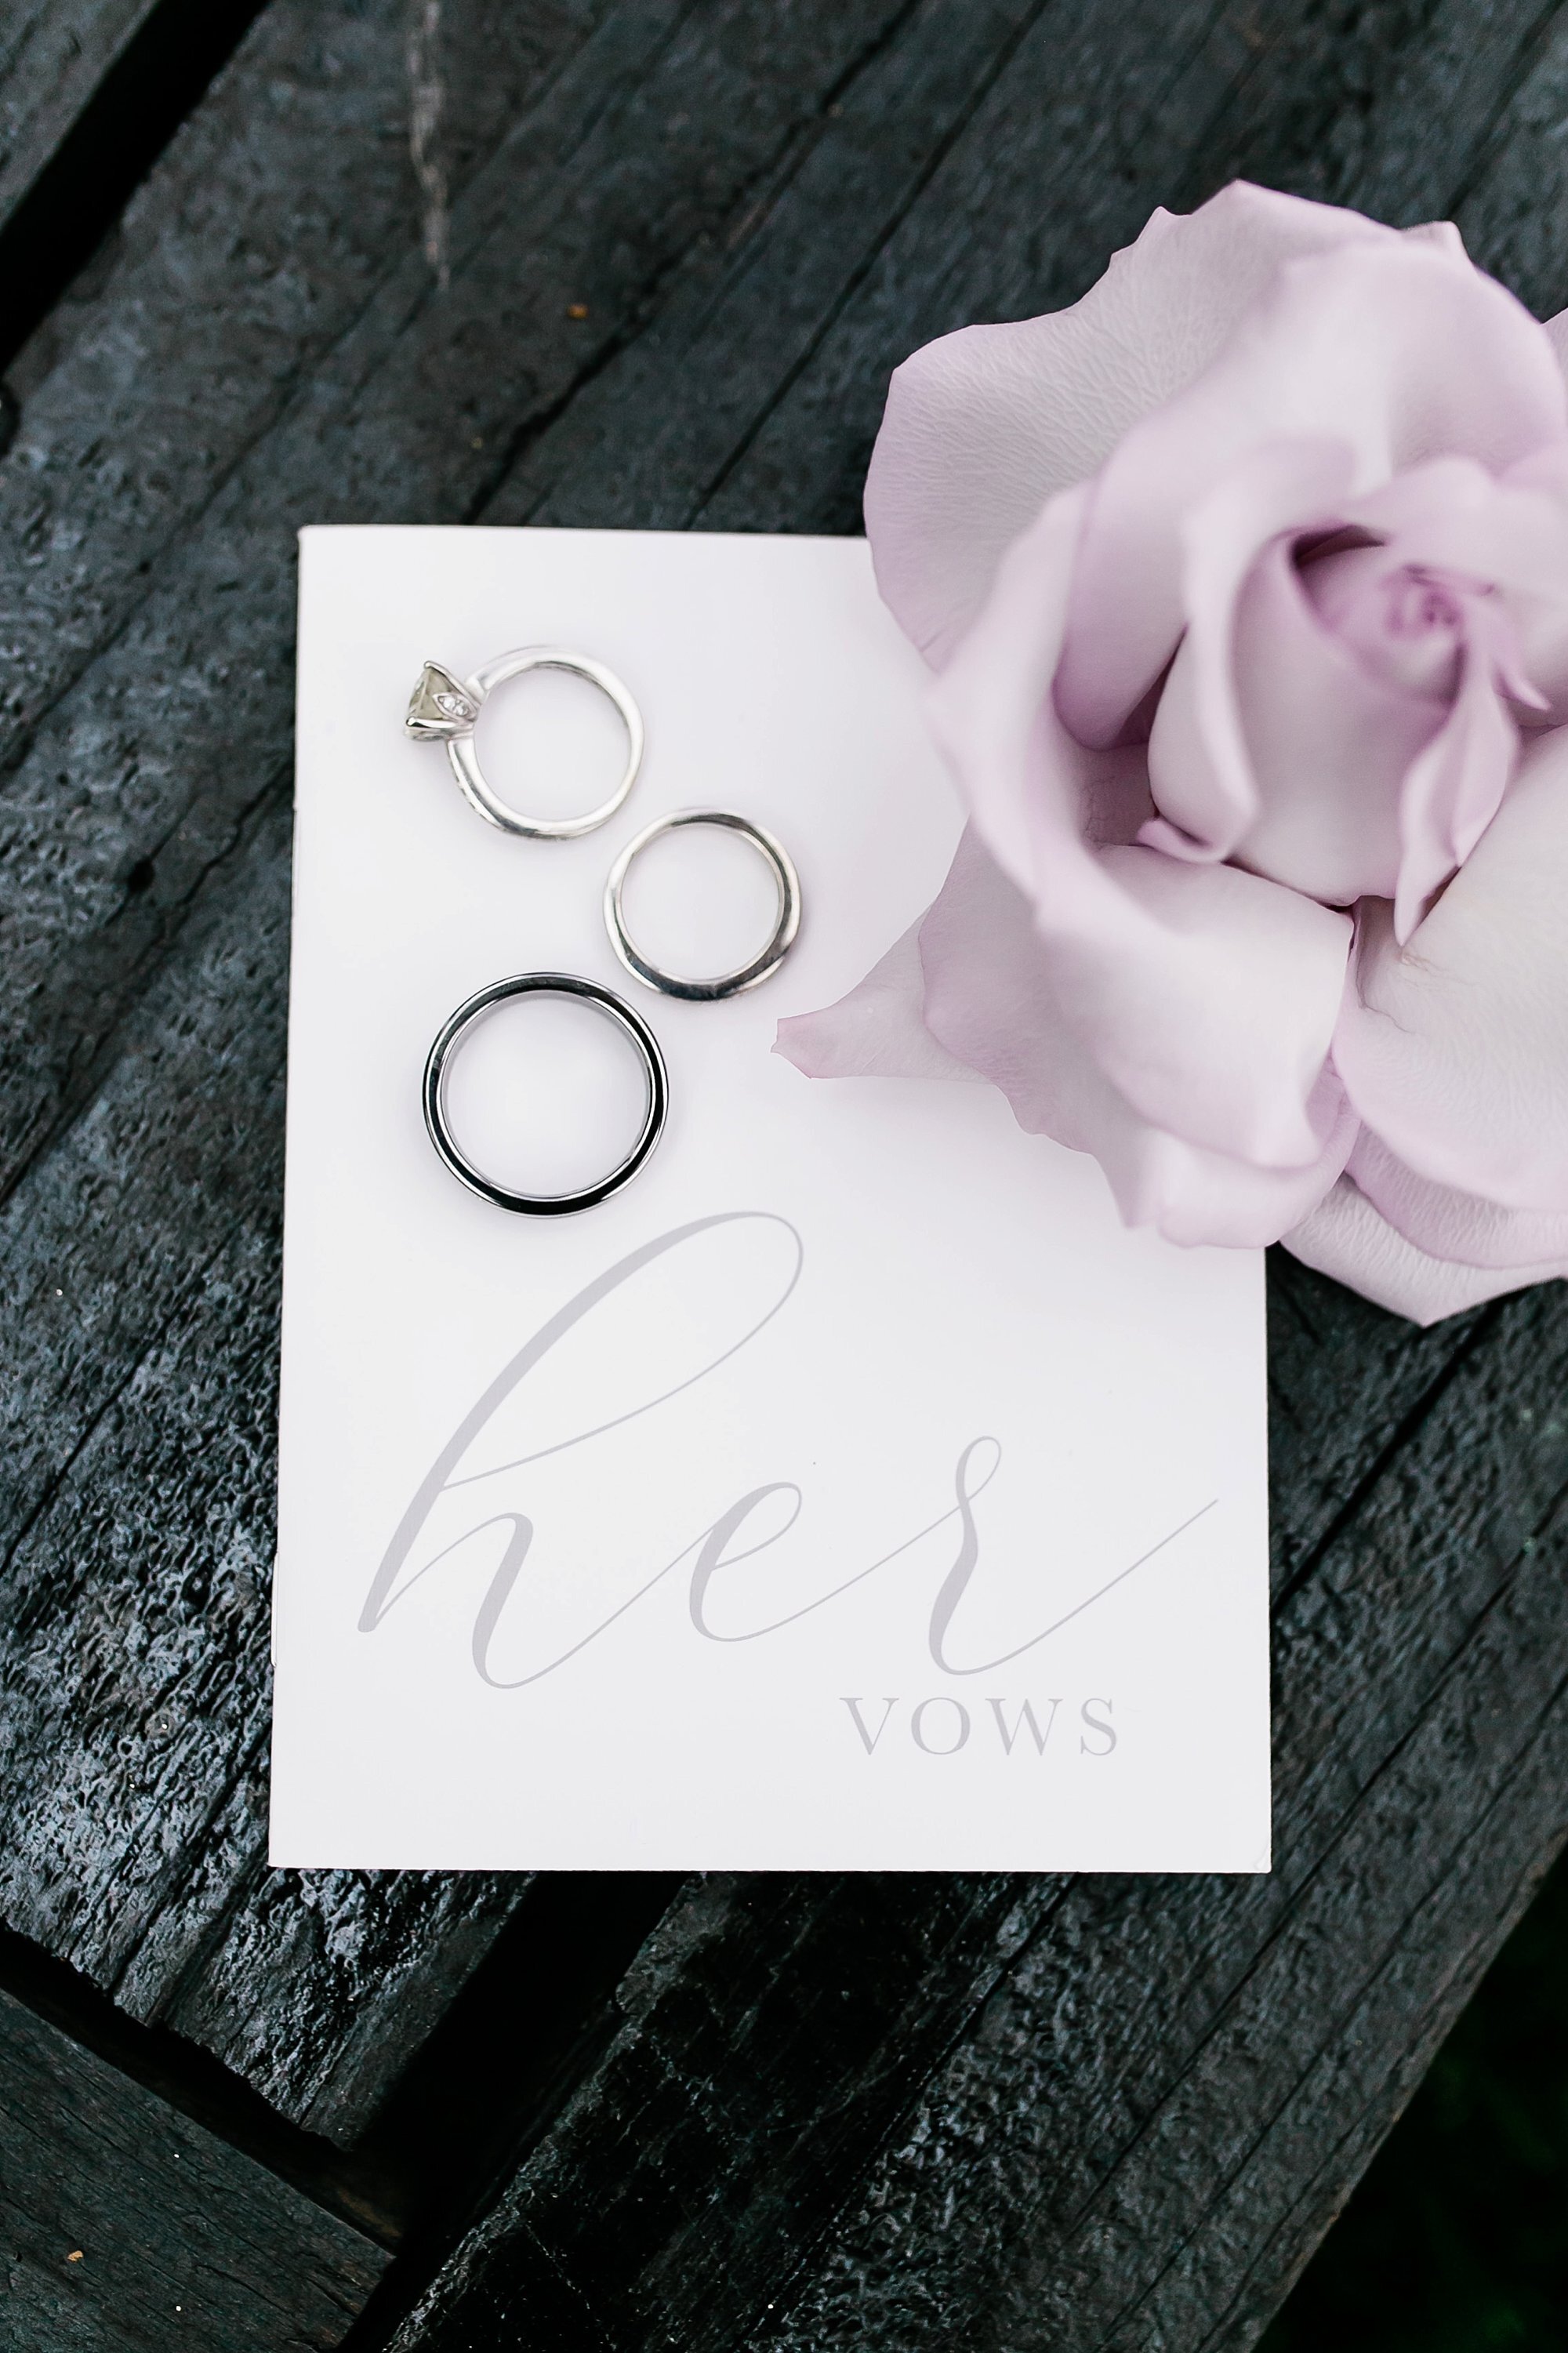  wedding bands on a card with a lilac flower 